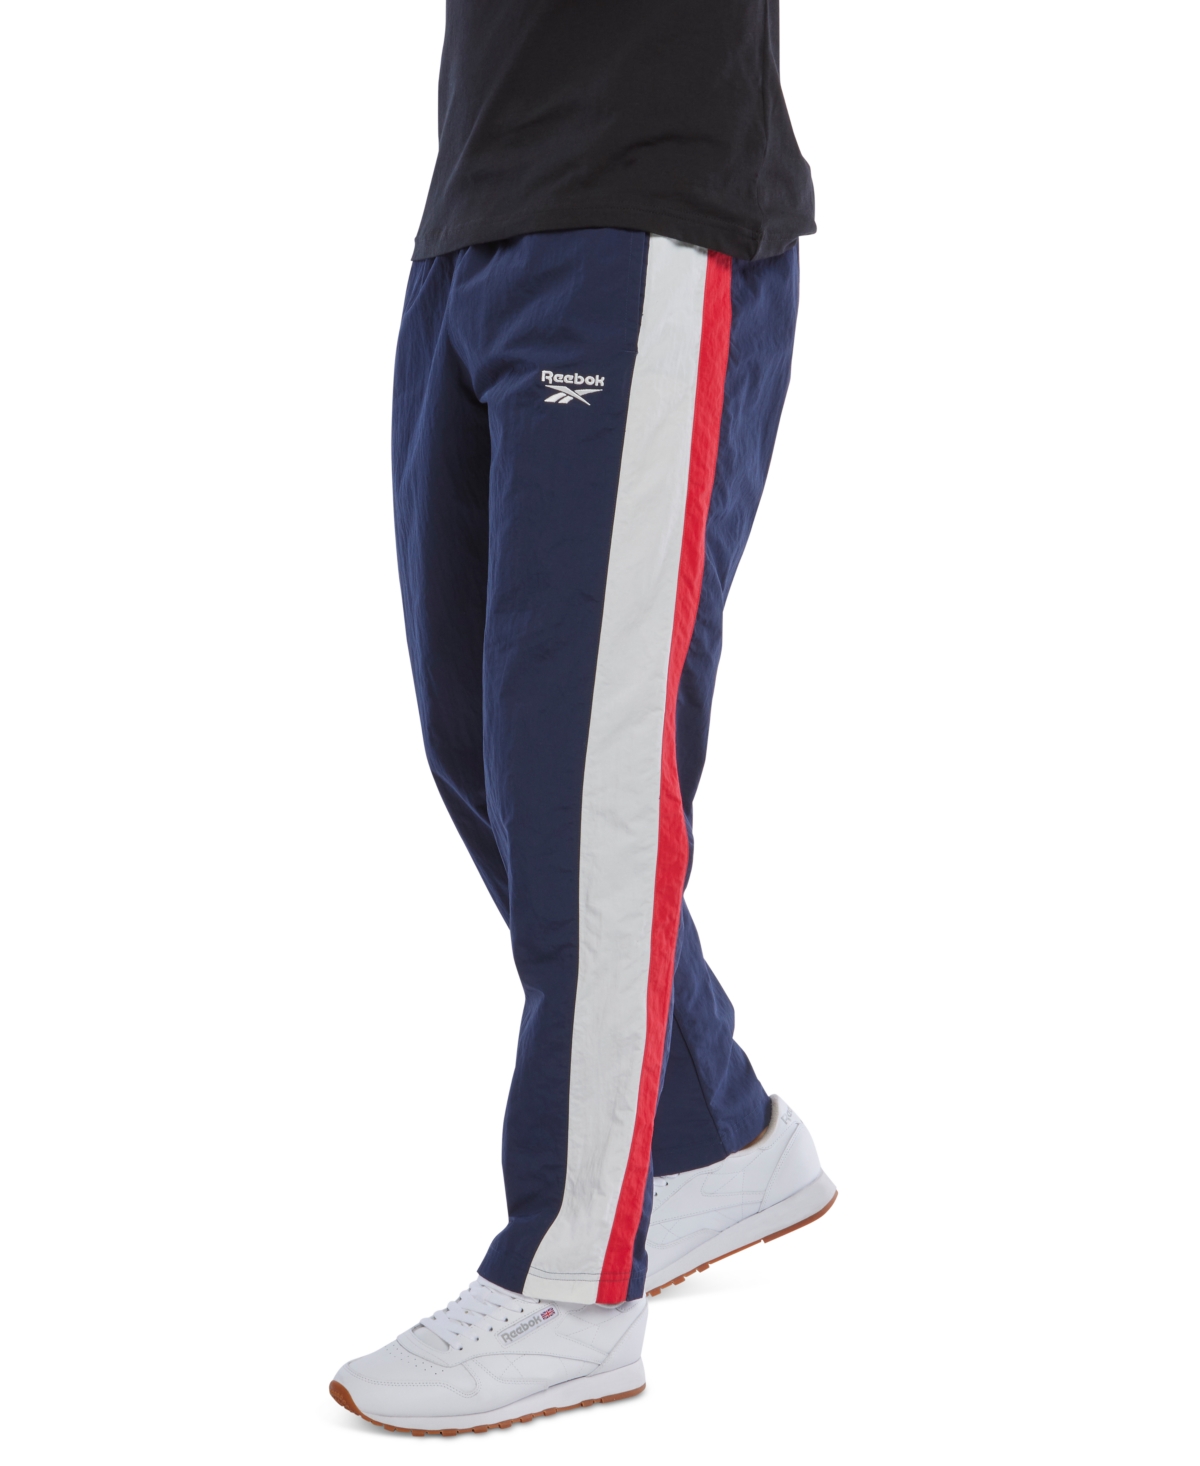 Men's Ivy League Regular-Fit Colorblocked Crinkled Track Pants - Red/navy/white